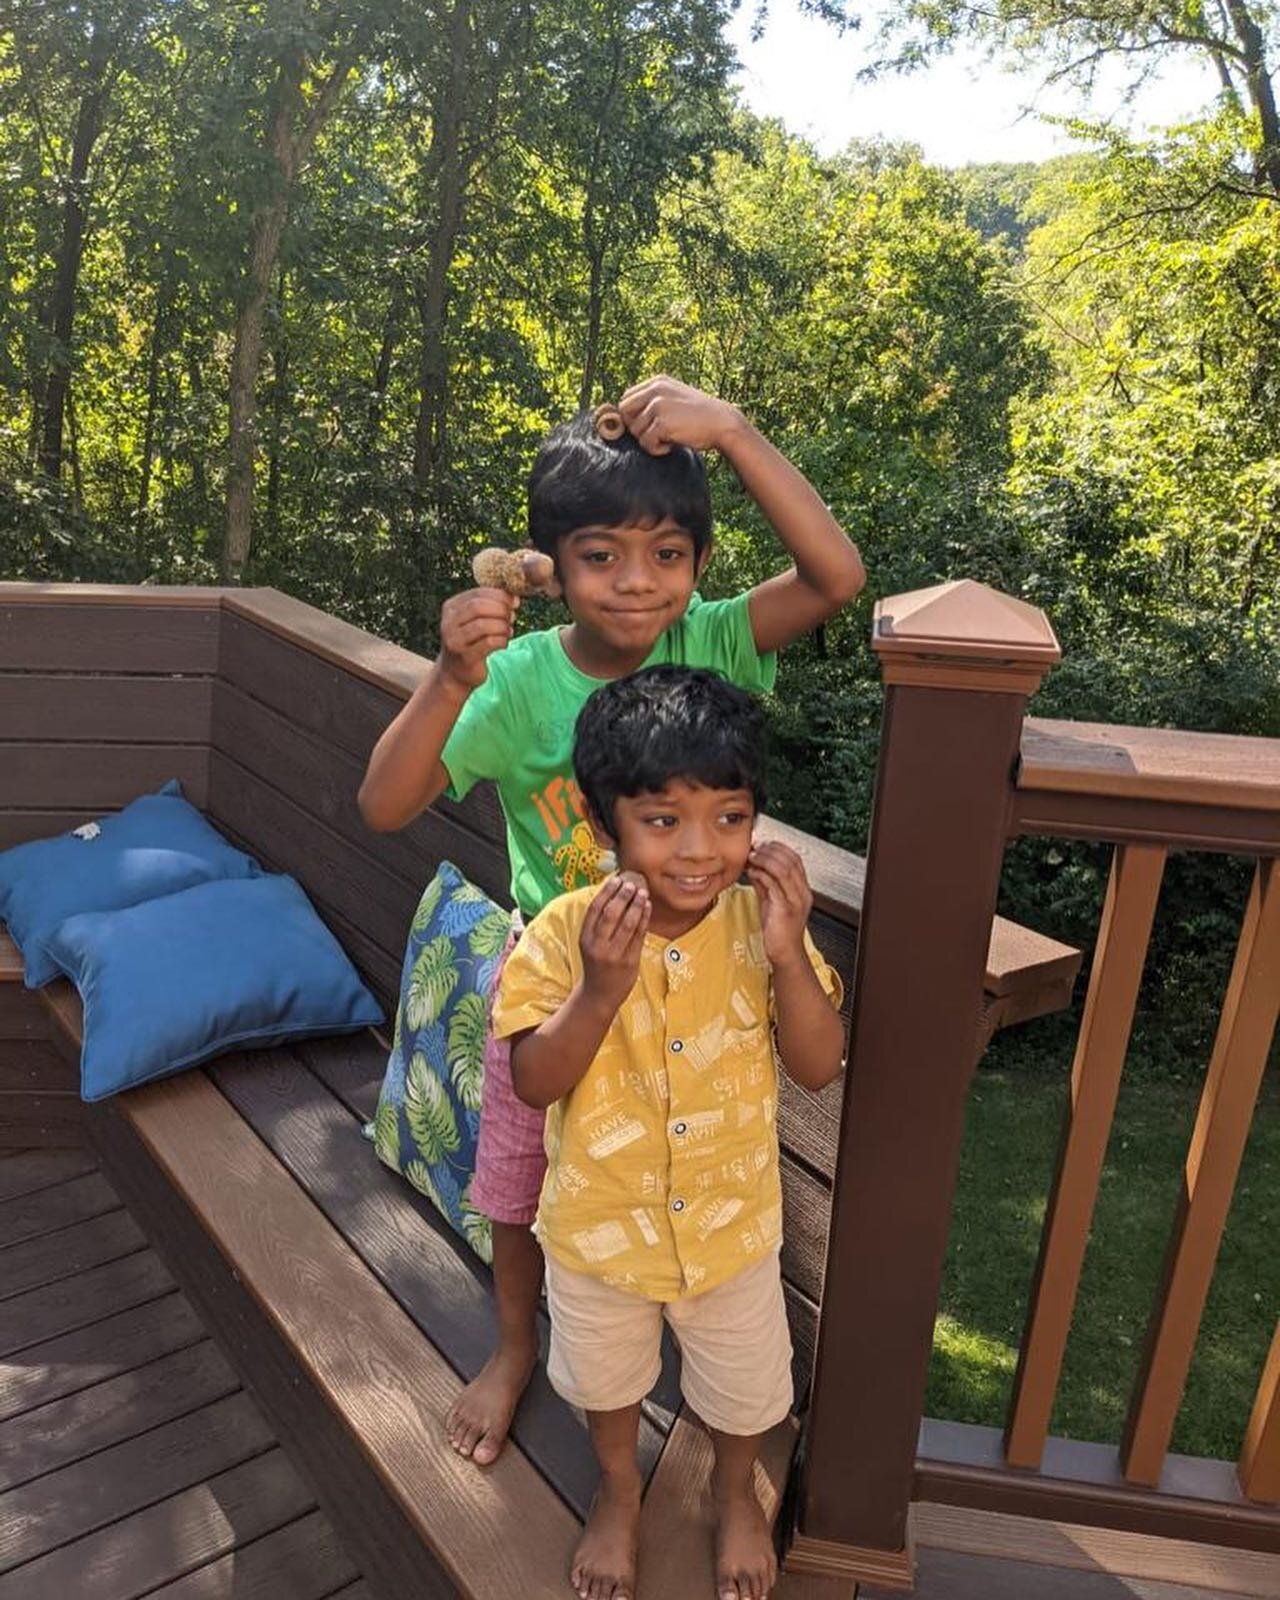 A Story about Two Baby Mangos:

I had just finished up a Mango Jungle session for a new jungle bb, when I received an unexpected phone call. 

The phone call was silent, but I heard a super cute voice in the background saying &ldquo;Sathu Akka.&rdquo